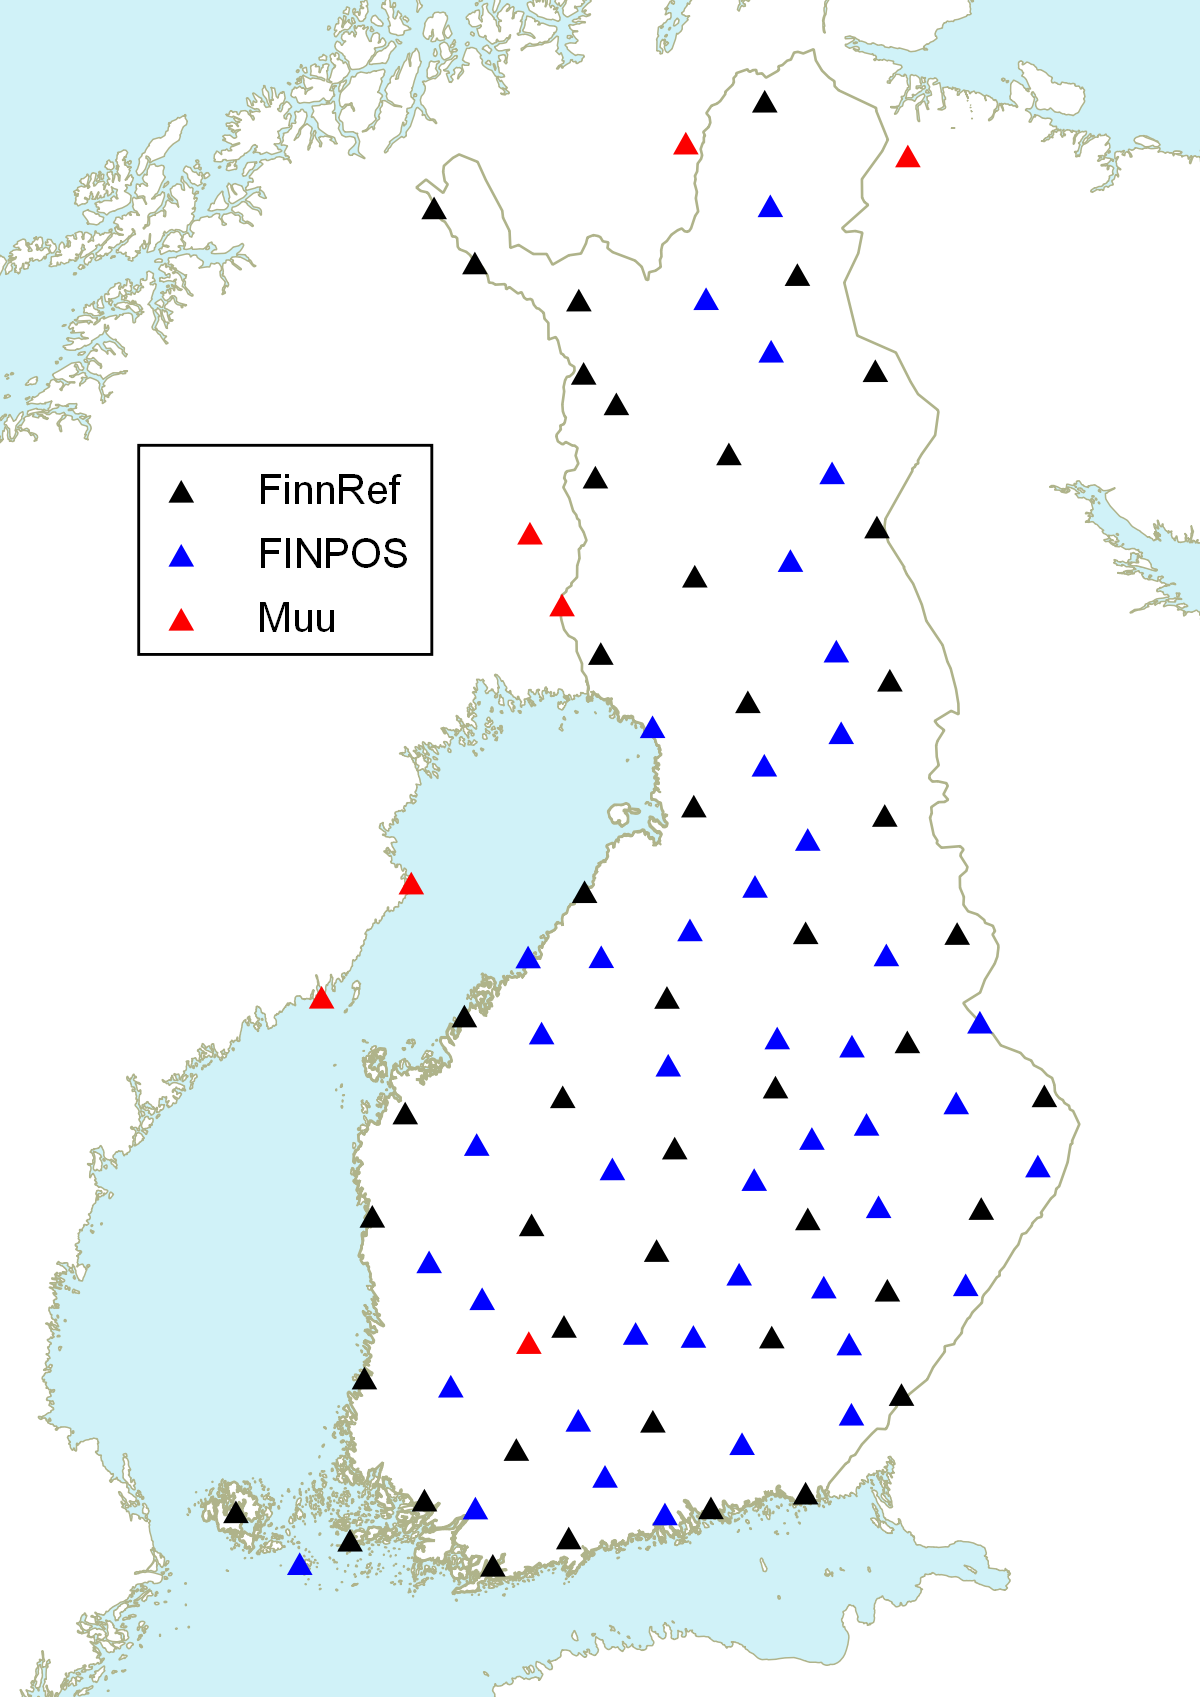 Reference stations used by the FINPOS service are spread across Finland.